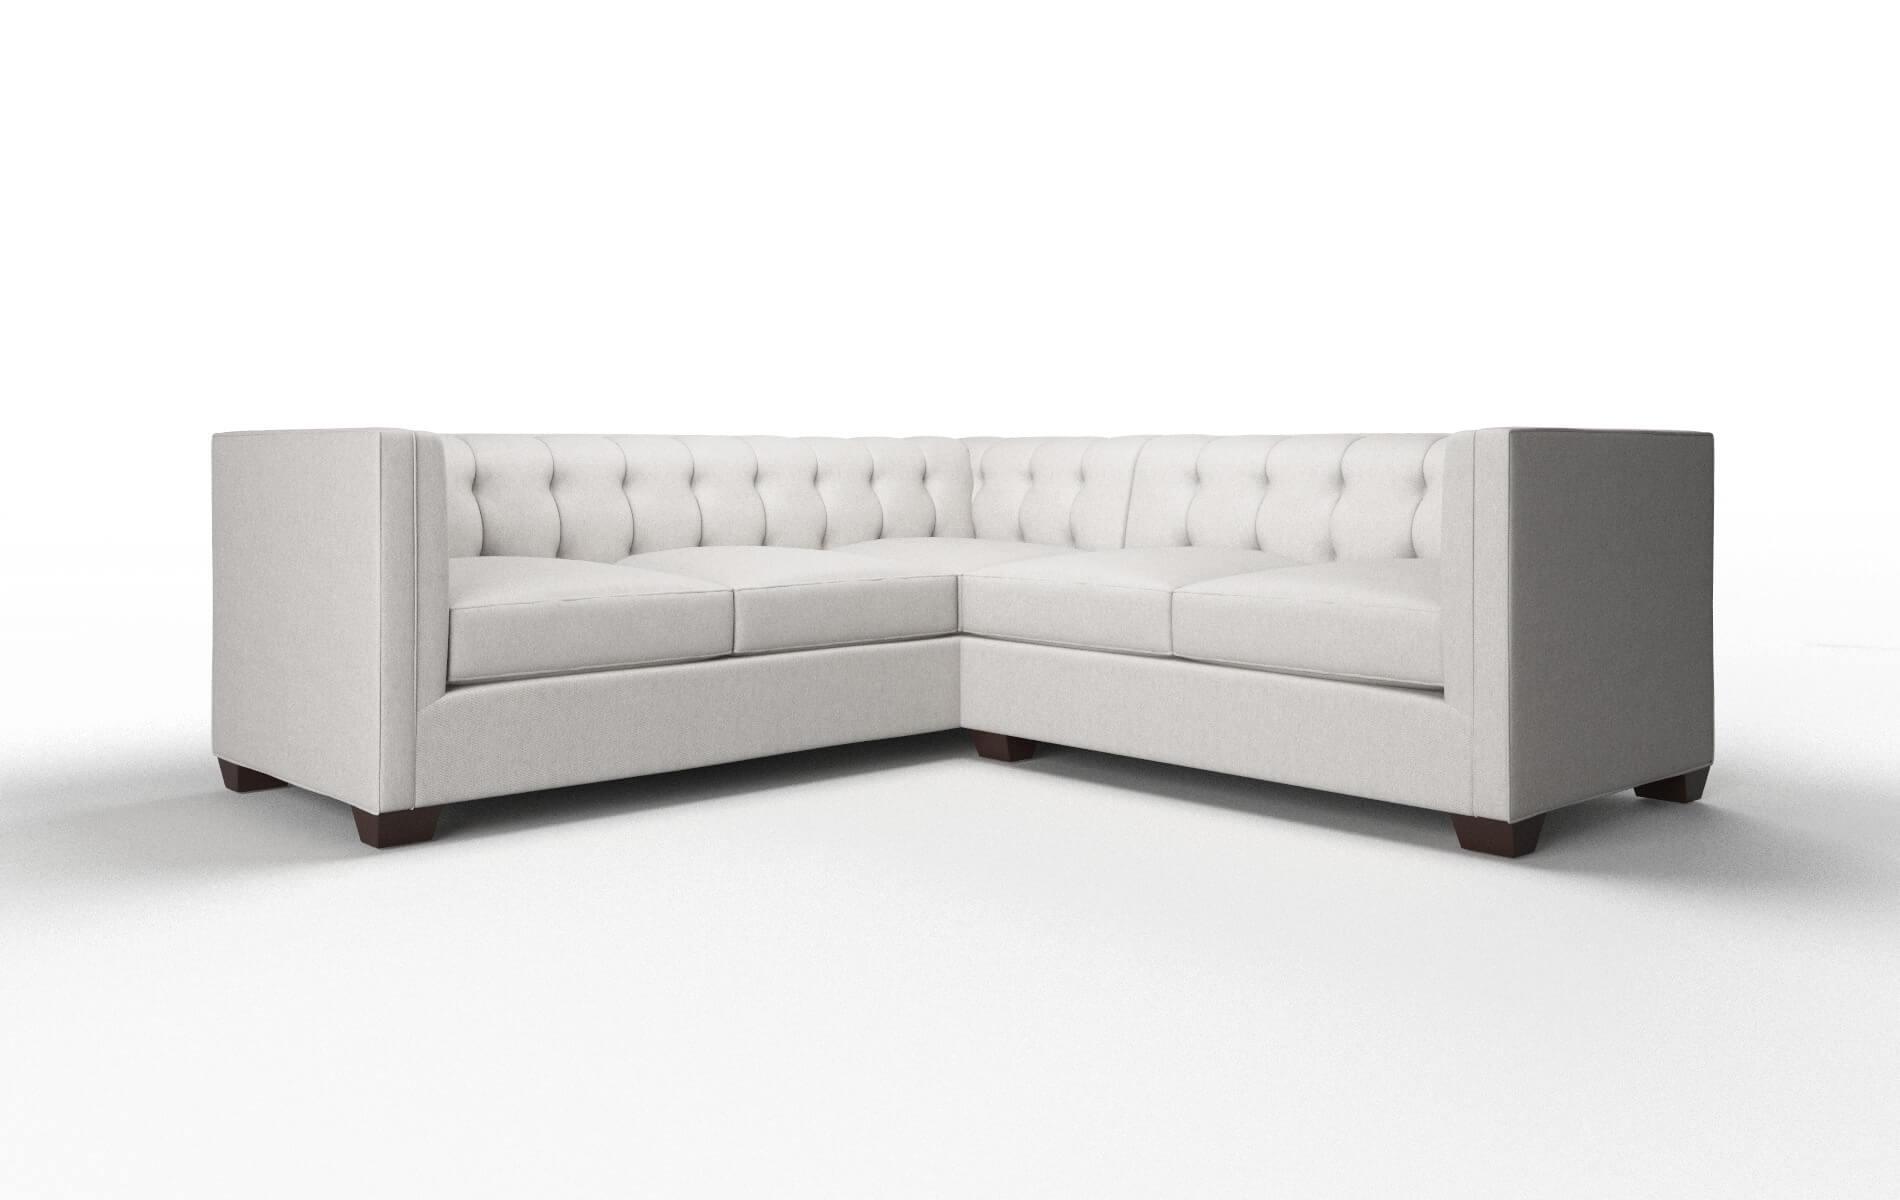 Grant Dream_d Sterling Sectional espresso legs 1